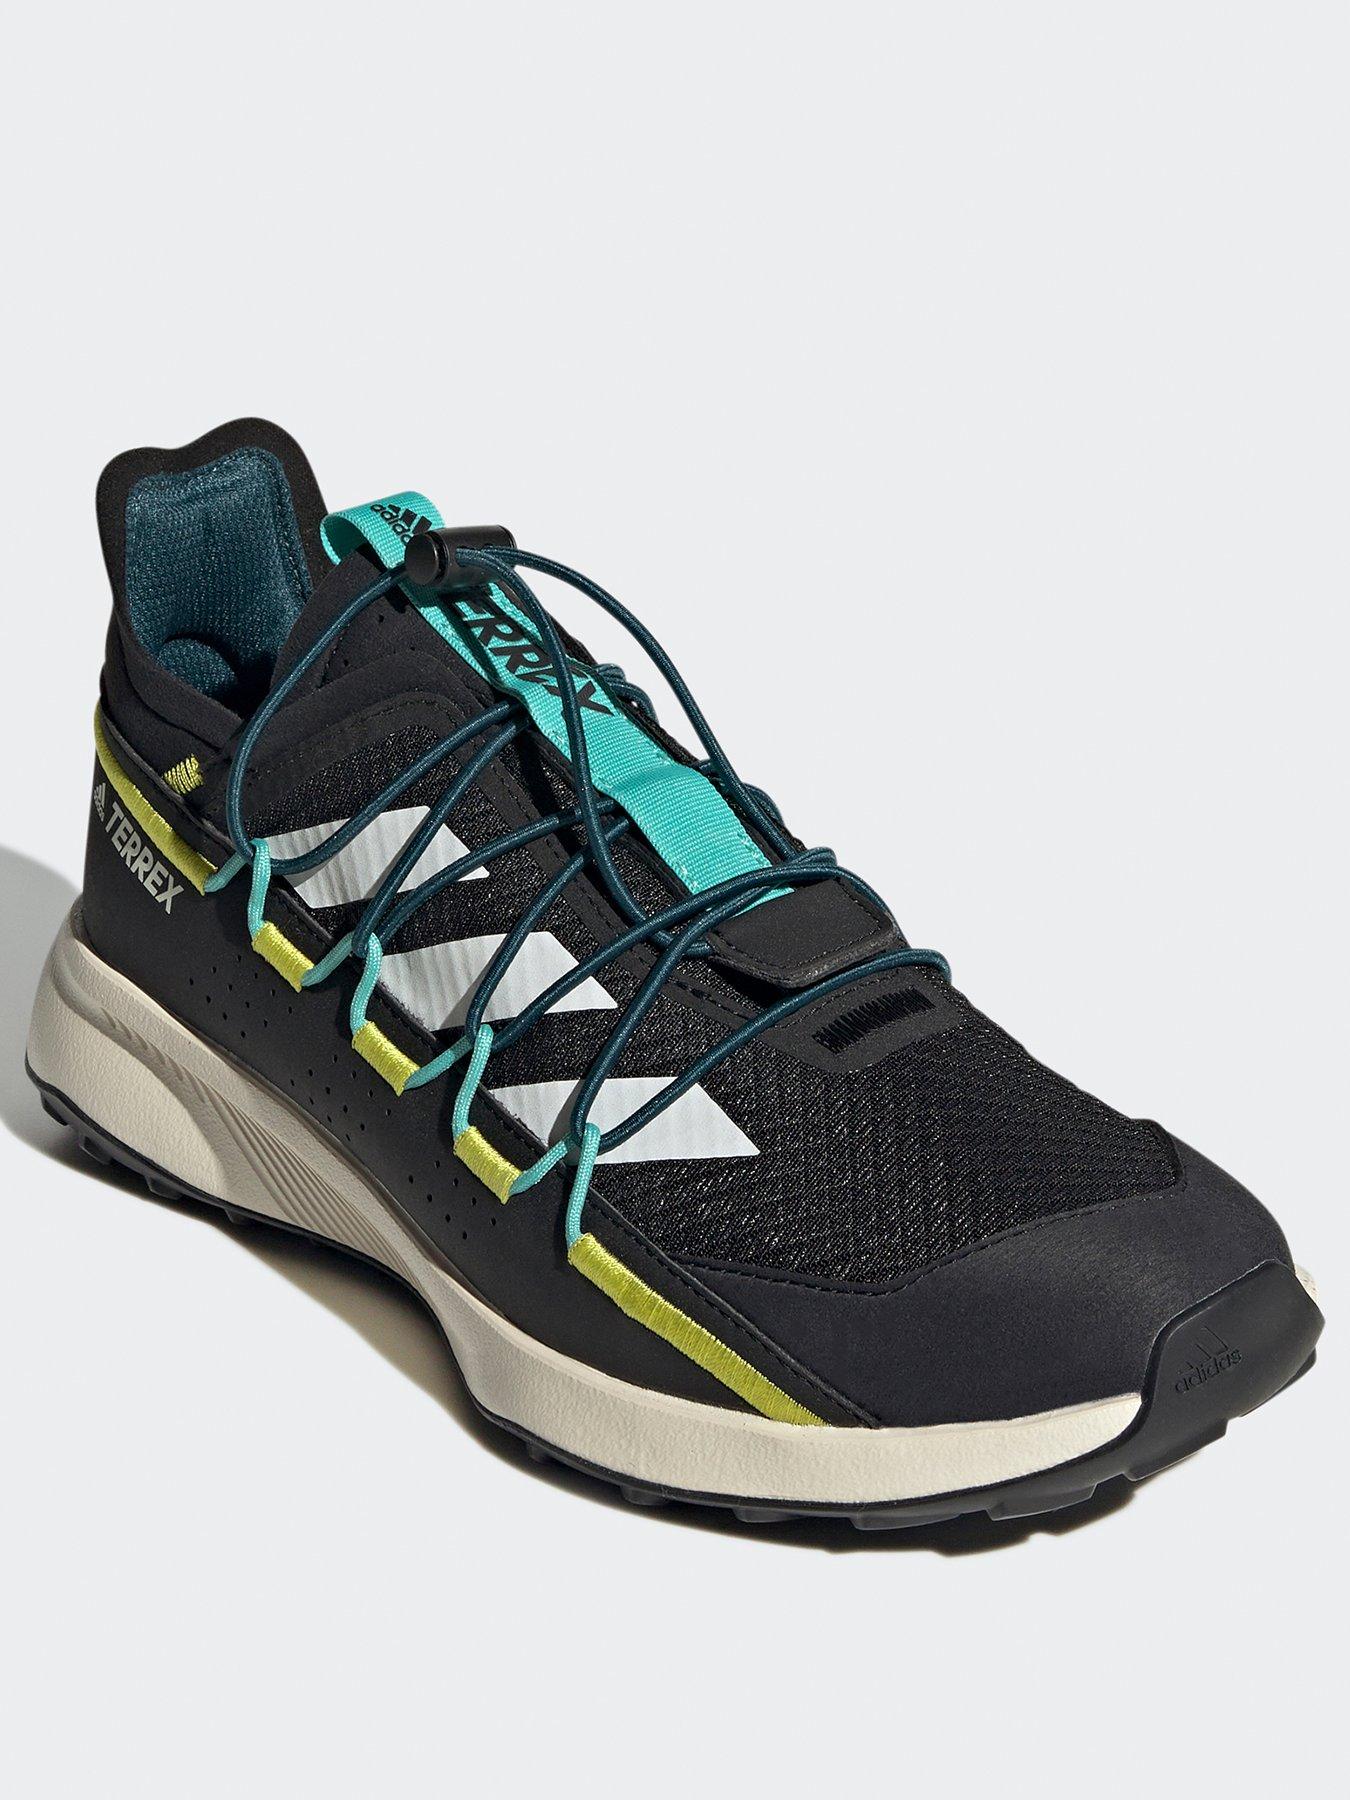 adidas Terrex Voyager 21 Travel Shoes | very.co.uk